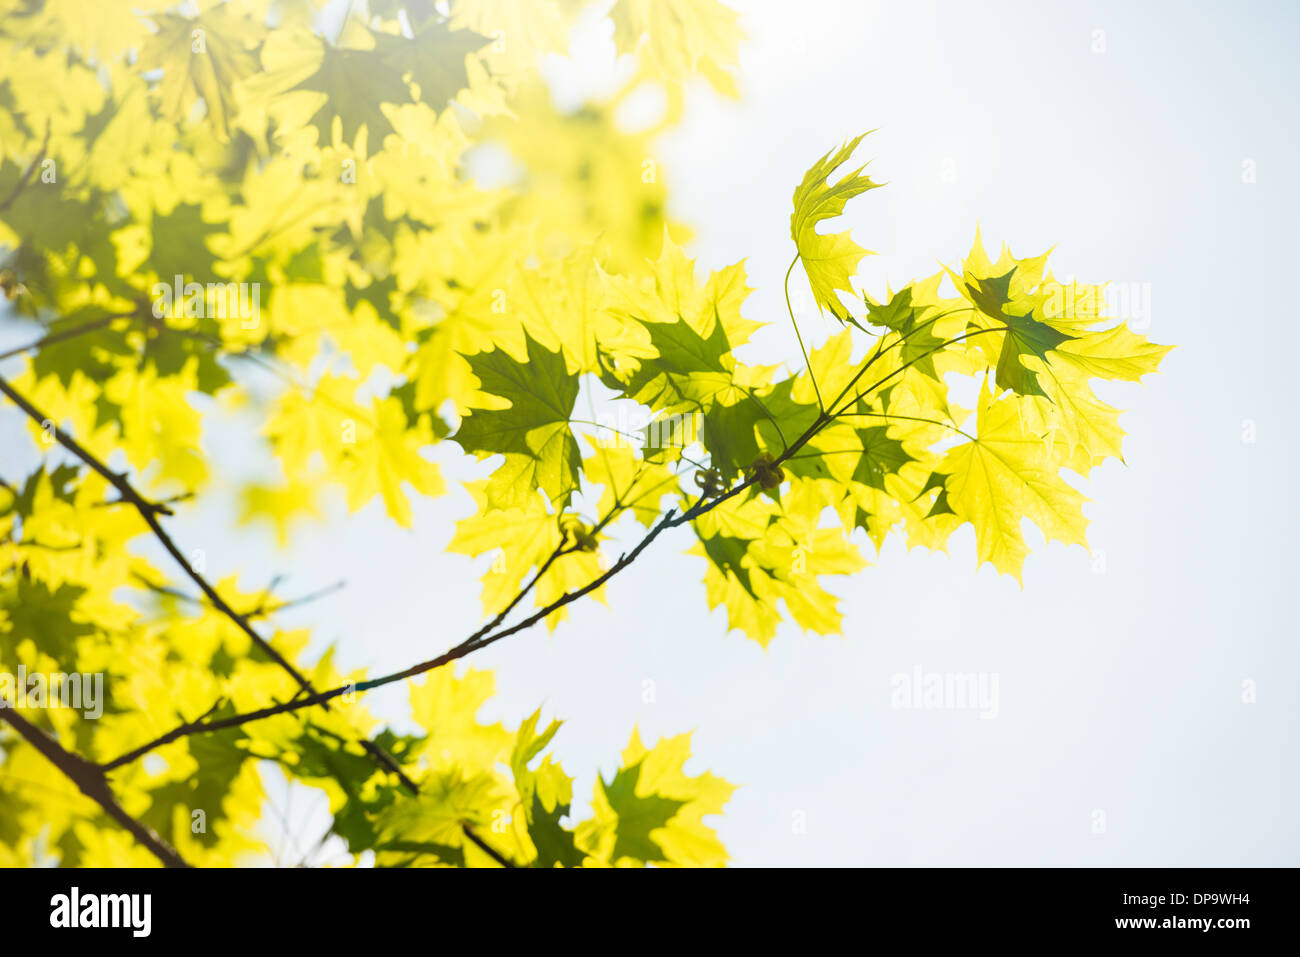 Sunshine and green leaves on a maple tree at spring Stock Photo